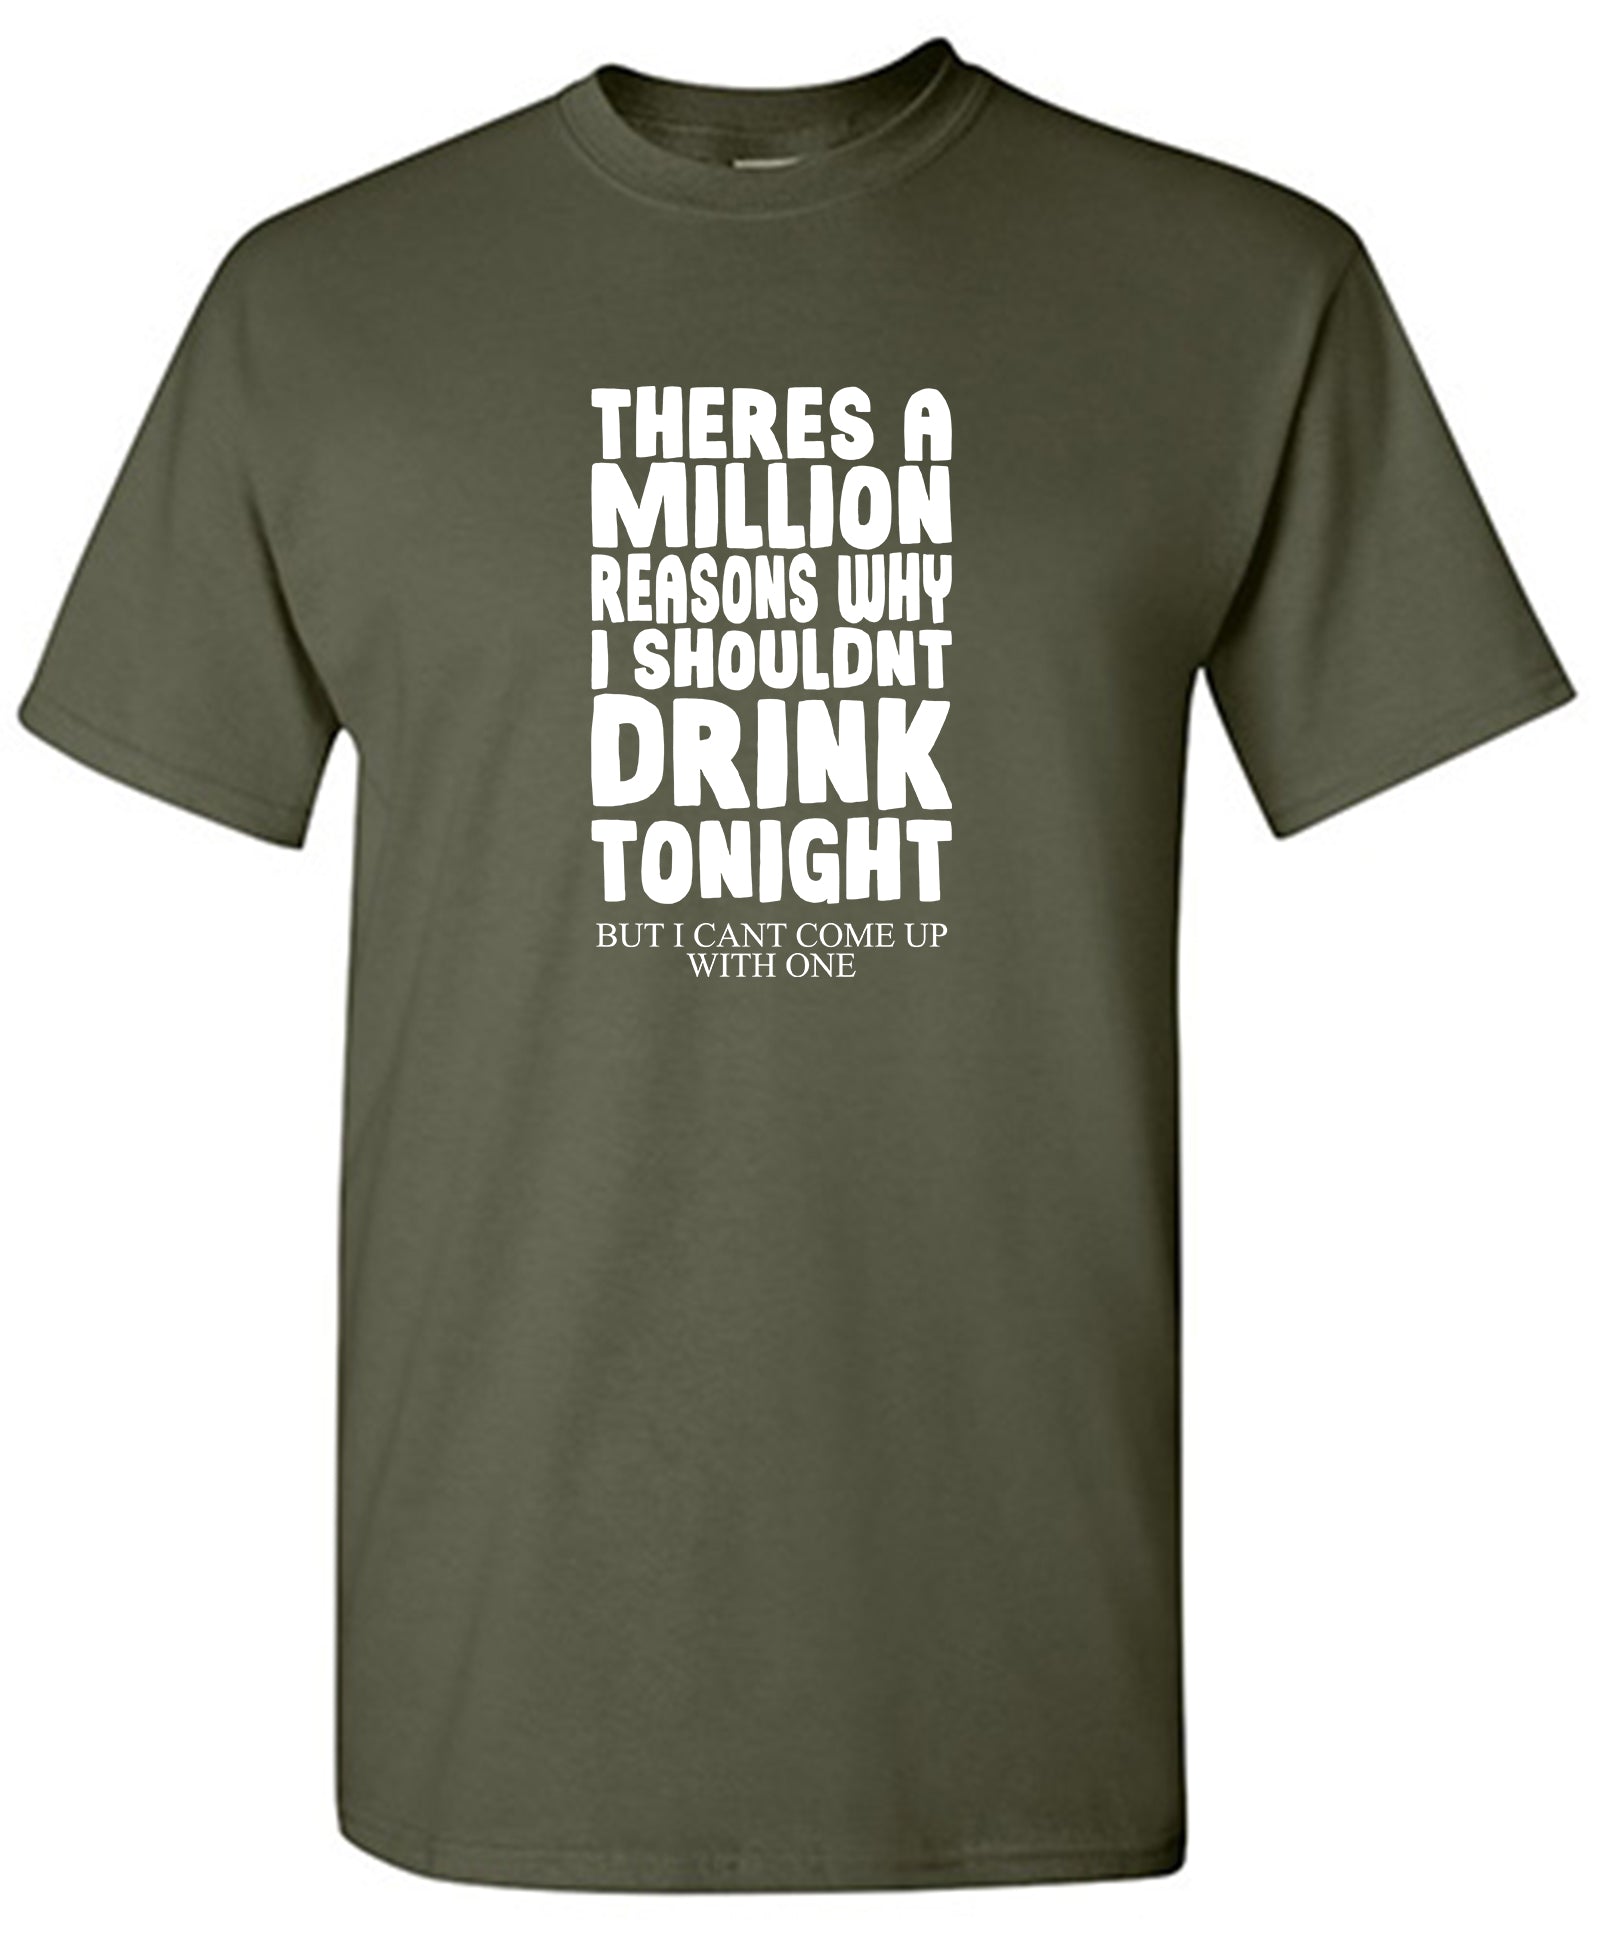 There's A Million Reasons Why I Shouldn't Drink Tonight, But I Can't Come Up With One - Funny T Shirts & Graphic Tees